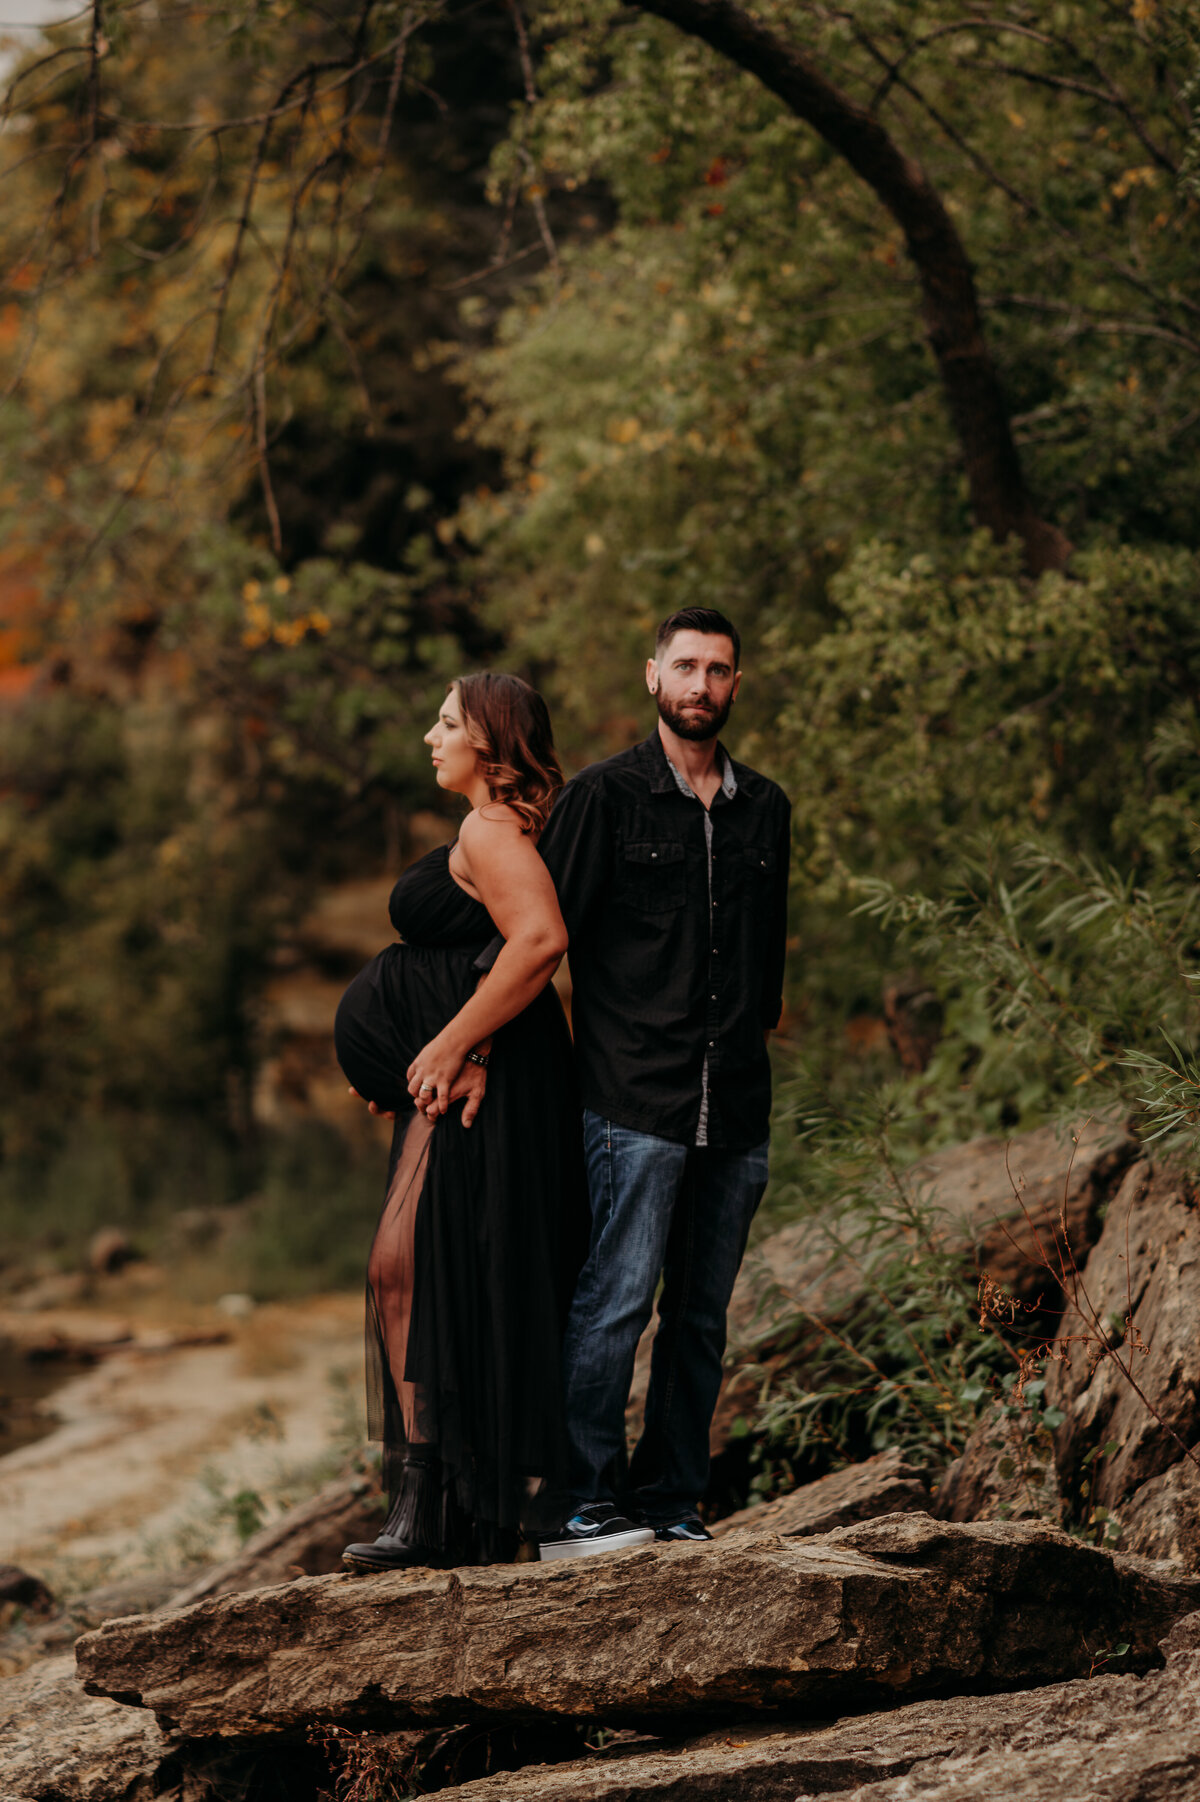 Discover woodland whispers in serene maternity portraits amidst nature in Minneapolis. Shannon Kathleen Photography captures the tranquil beauty of your maternal journey.